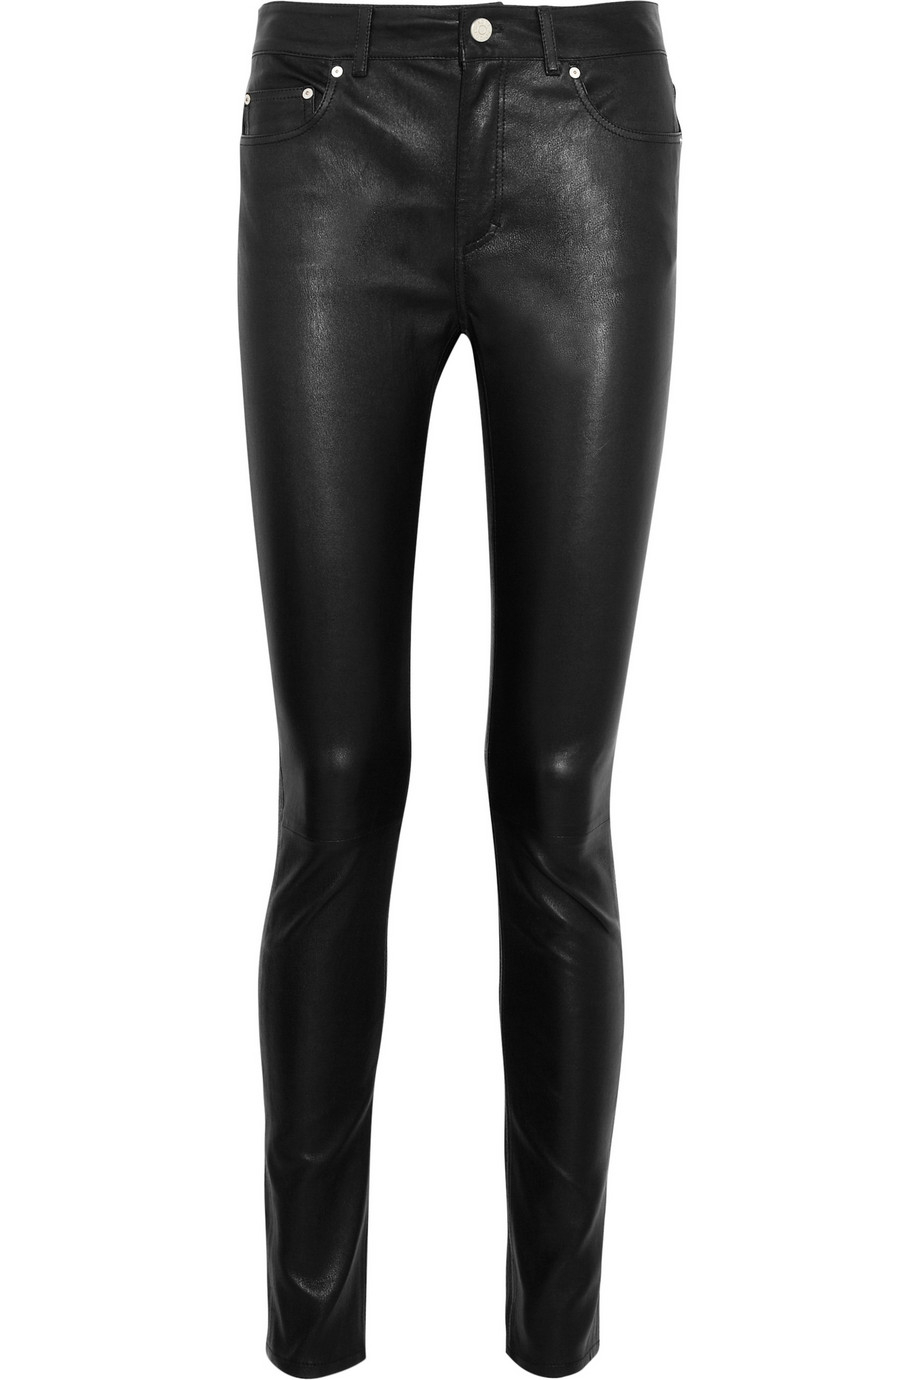 leather skinny jeans womens